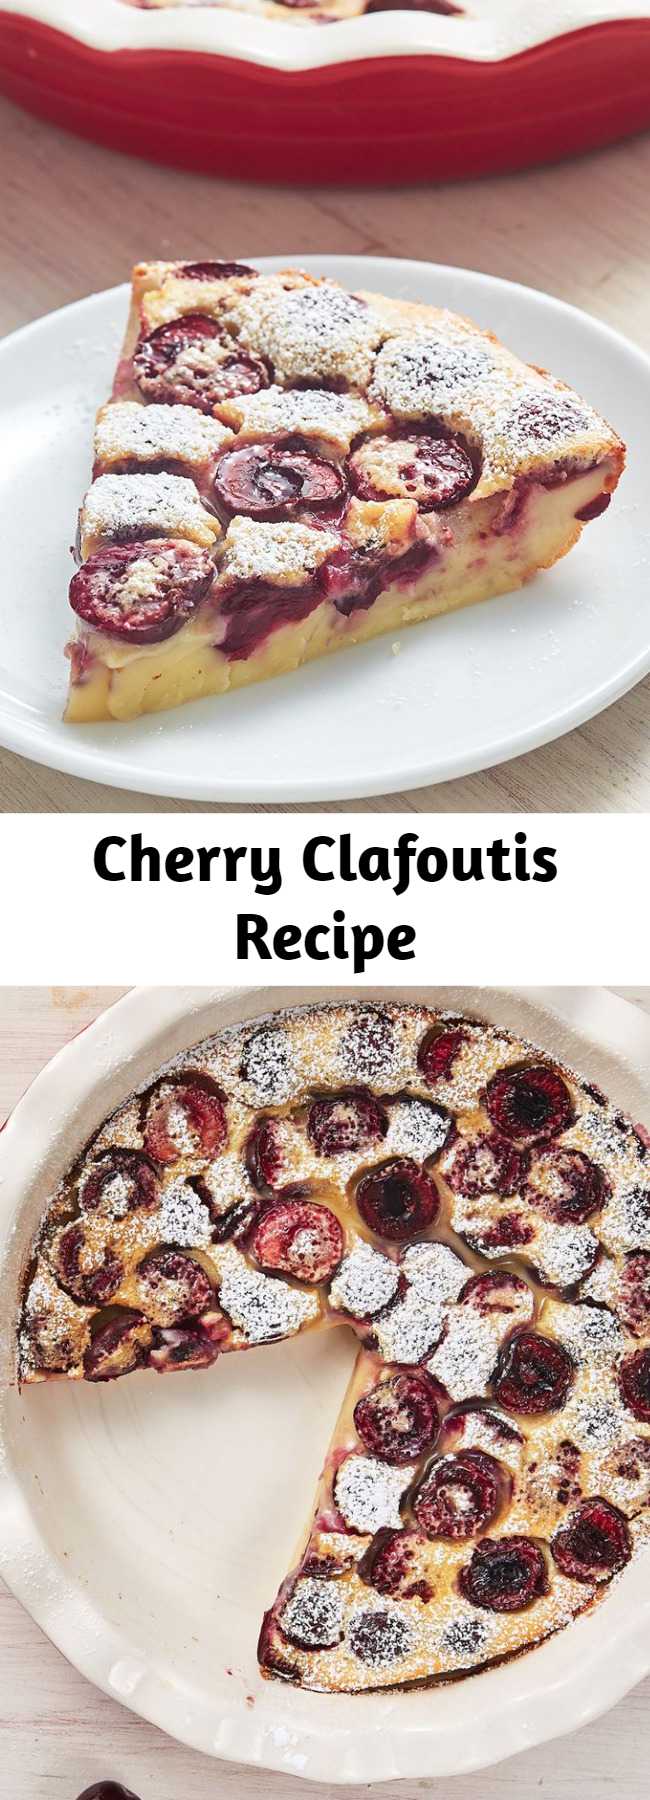 Cherry Clafoutis Recipe - This sweet Cherry Clafoutis is like a cross between flan and cake, lightly flavored with a tablespoon of amaretto liqueur.